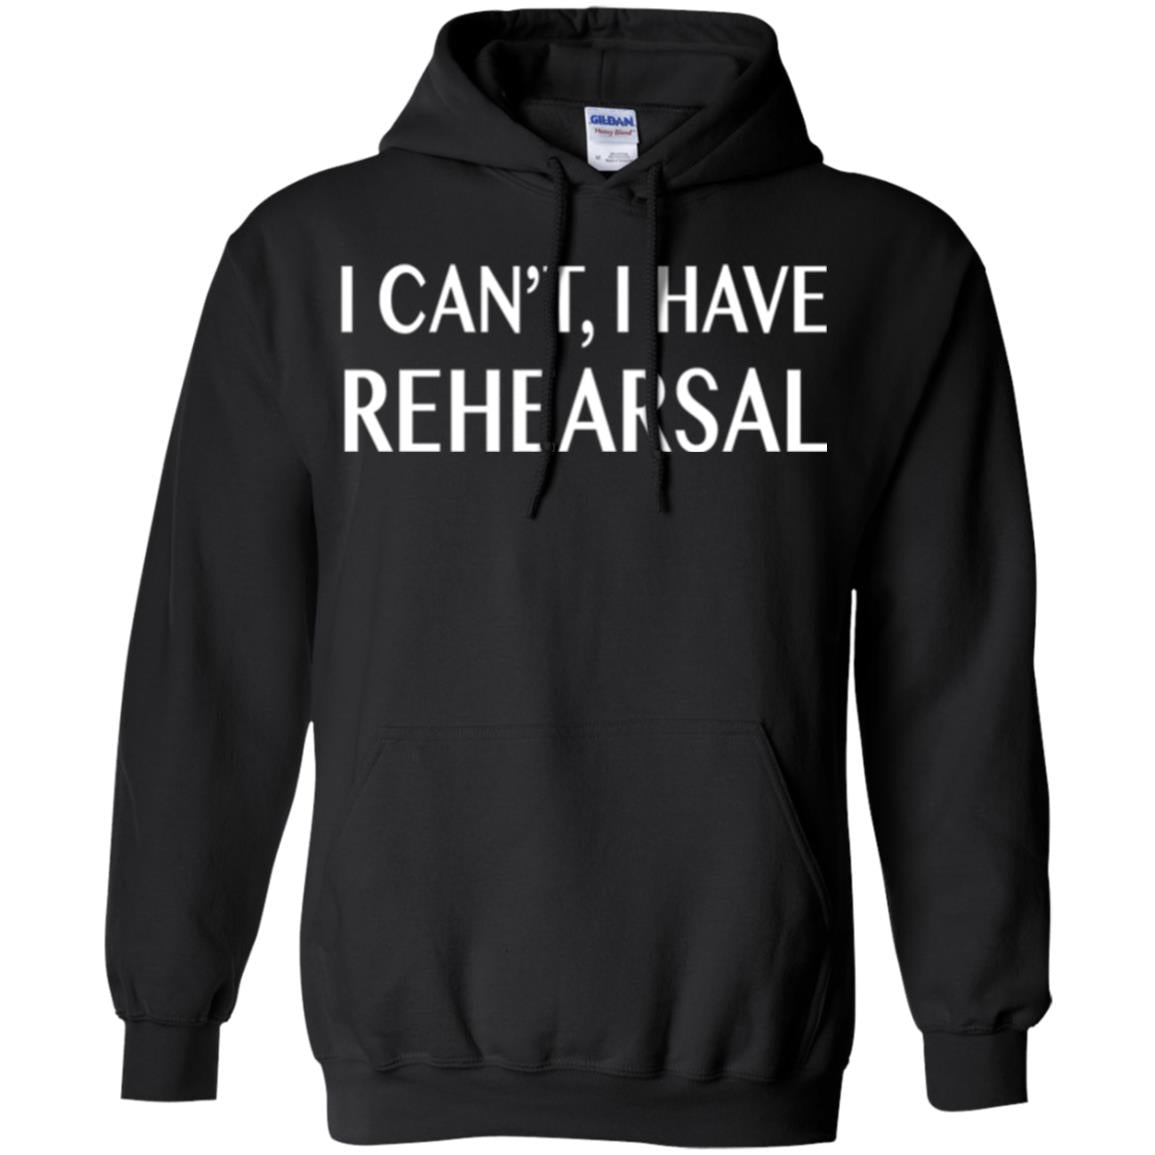 Acting Broadway Drama T-shirt I Can_t I Have Rehearsal